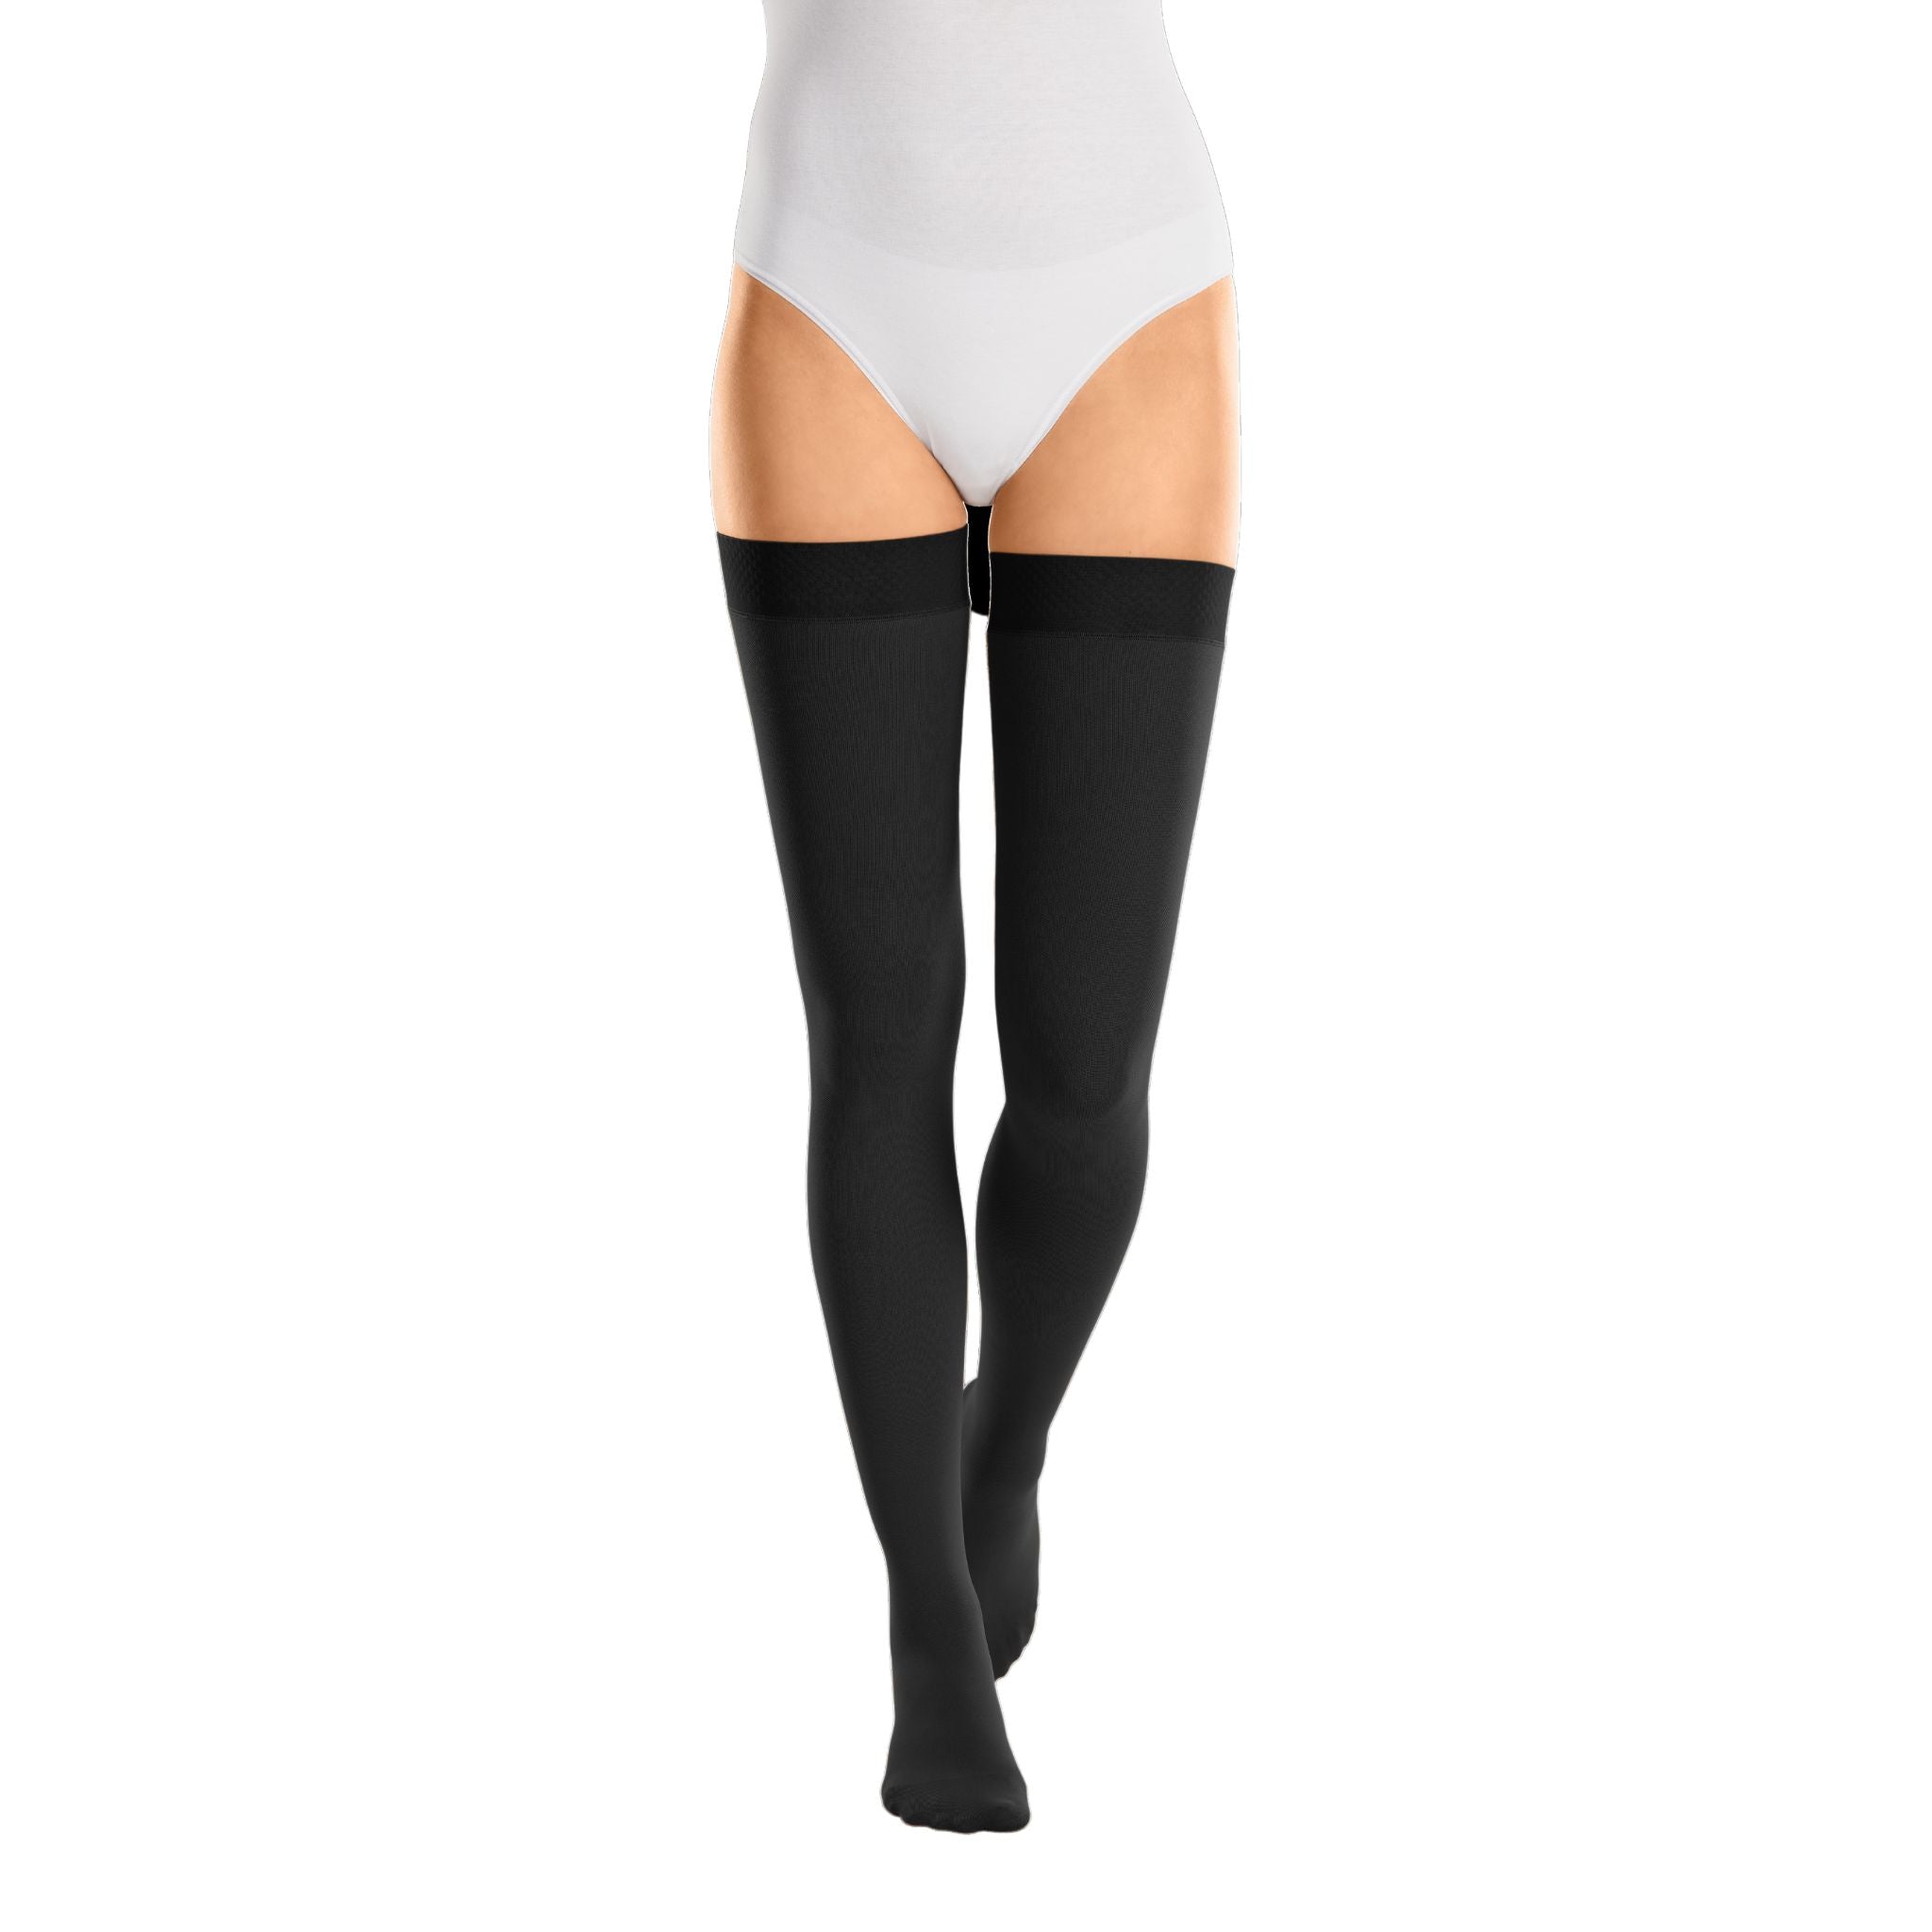 Compression Stockings | Thigh High | Closed Toe | Sensitive Topband Wide | Black | mediven cotton